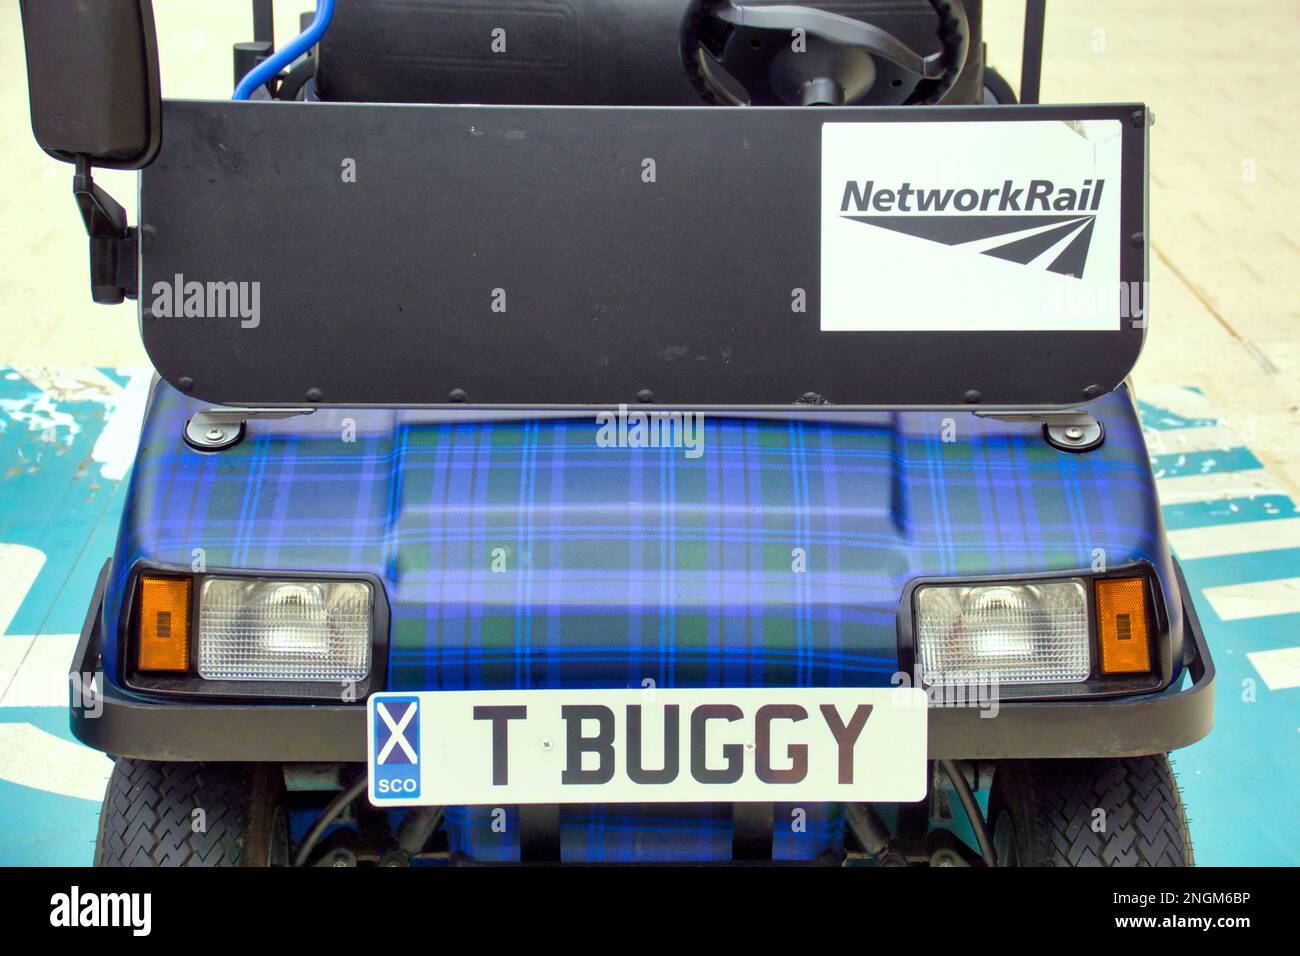 electric buggies providing mobility assistance for customers in Glasgow ventral railway station Glasgow, Scotland, UK Stock Photo